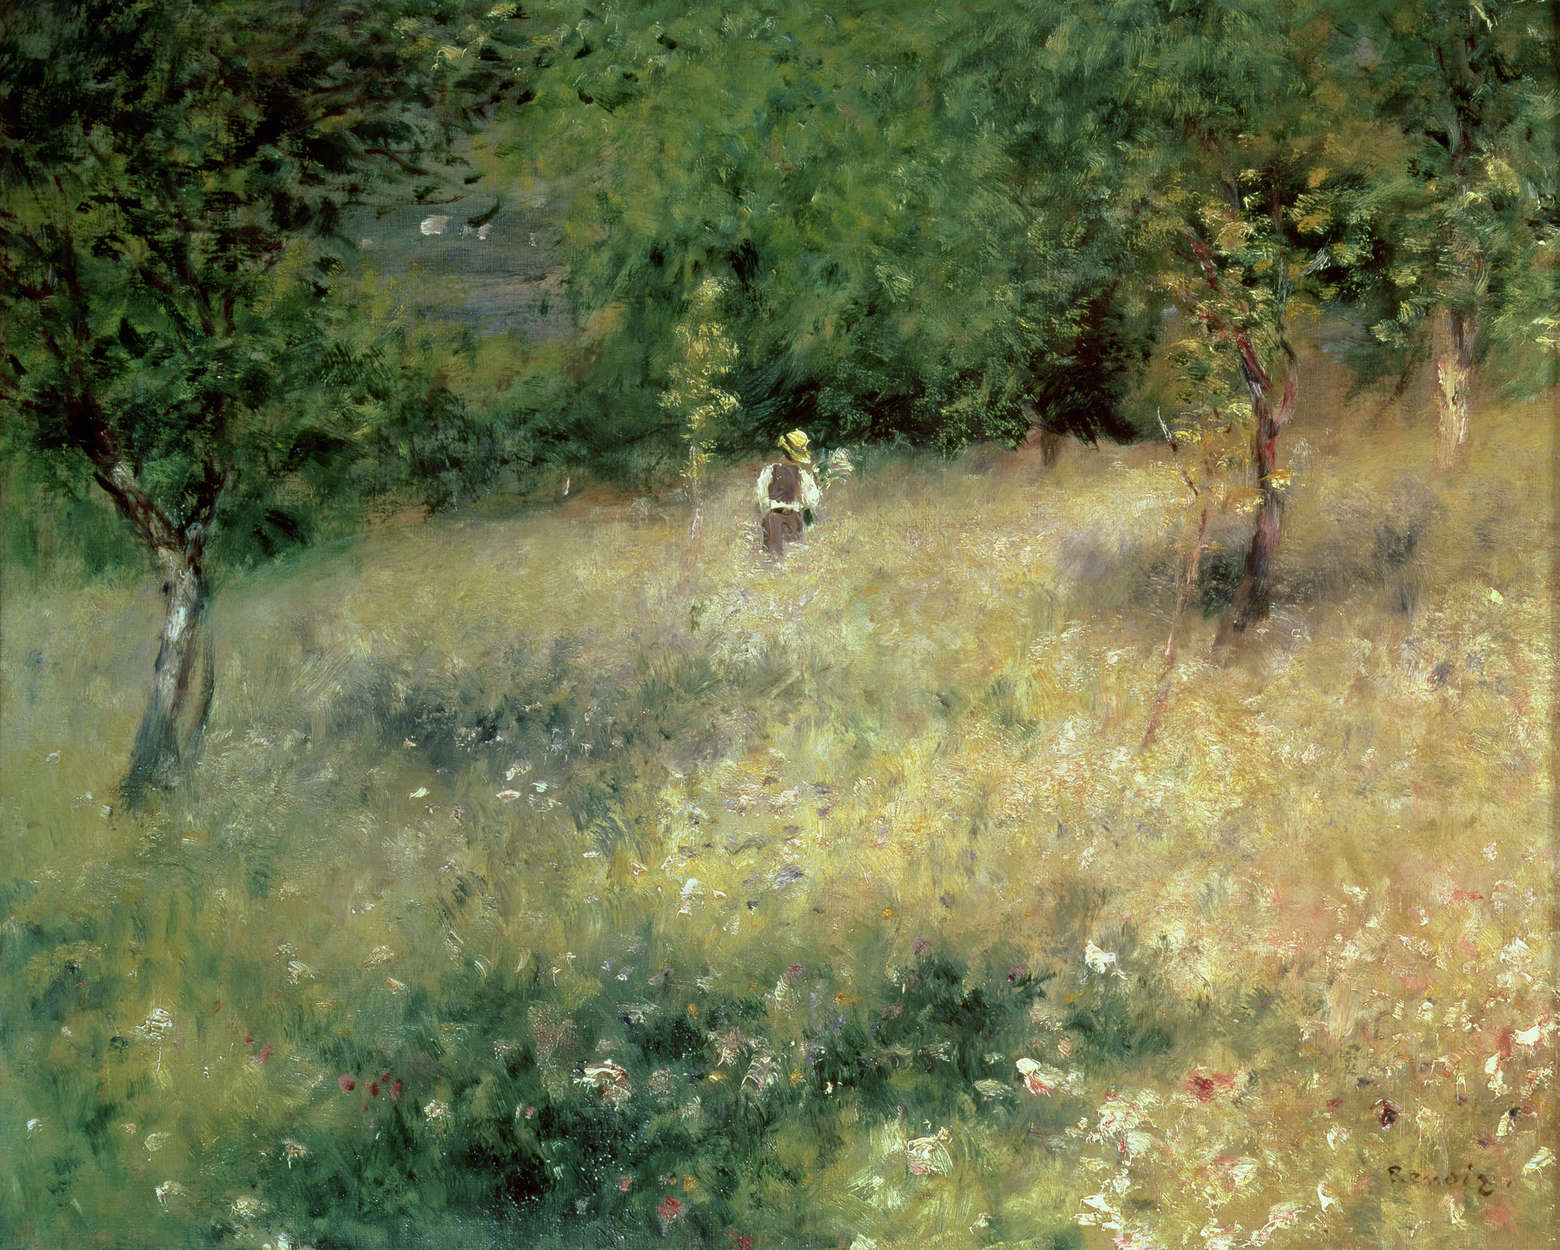             Photo wallpaper "Spring in Chatou" by Pierre Auguste Renoir
        